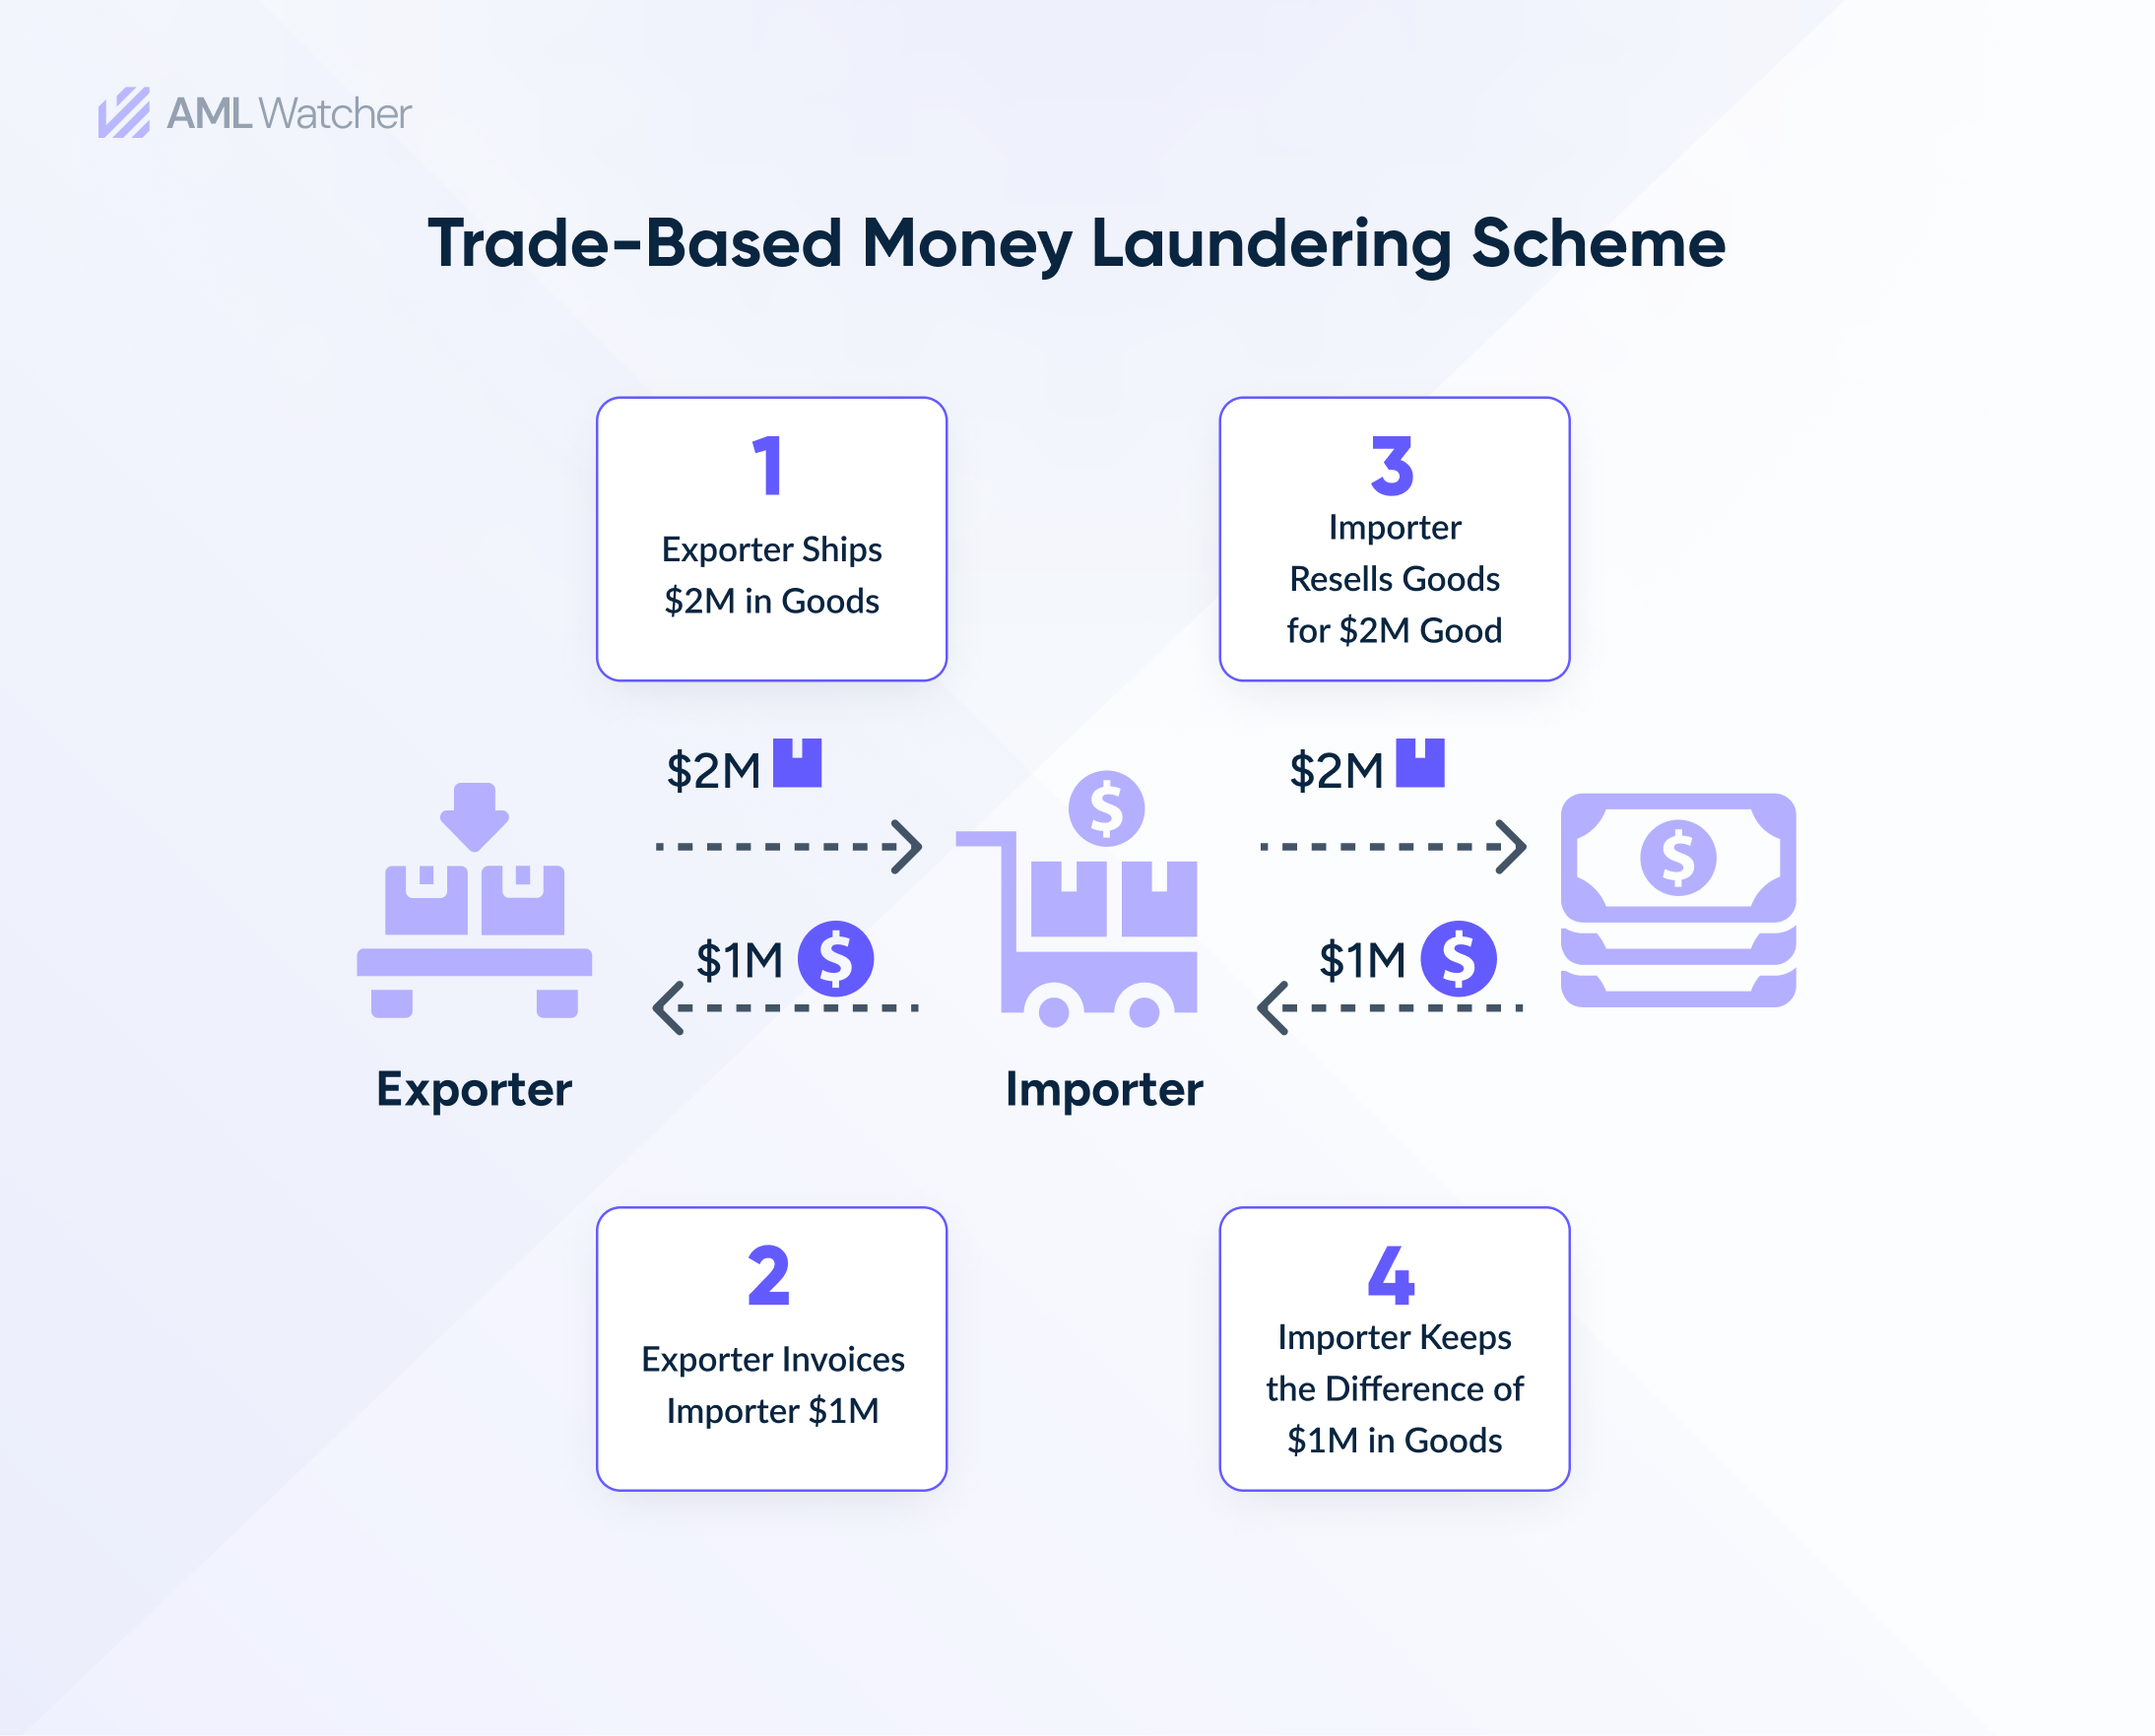 This image shows the process of money laundering through trade-based money laundering. 